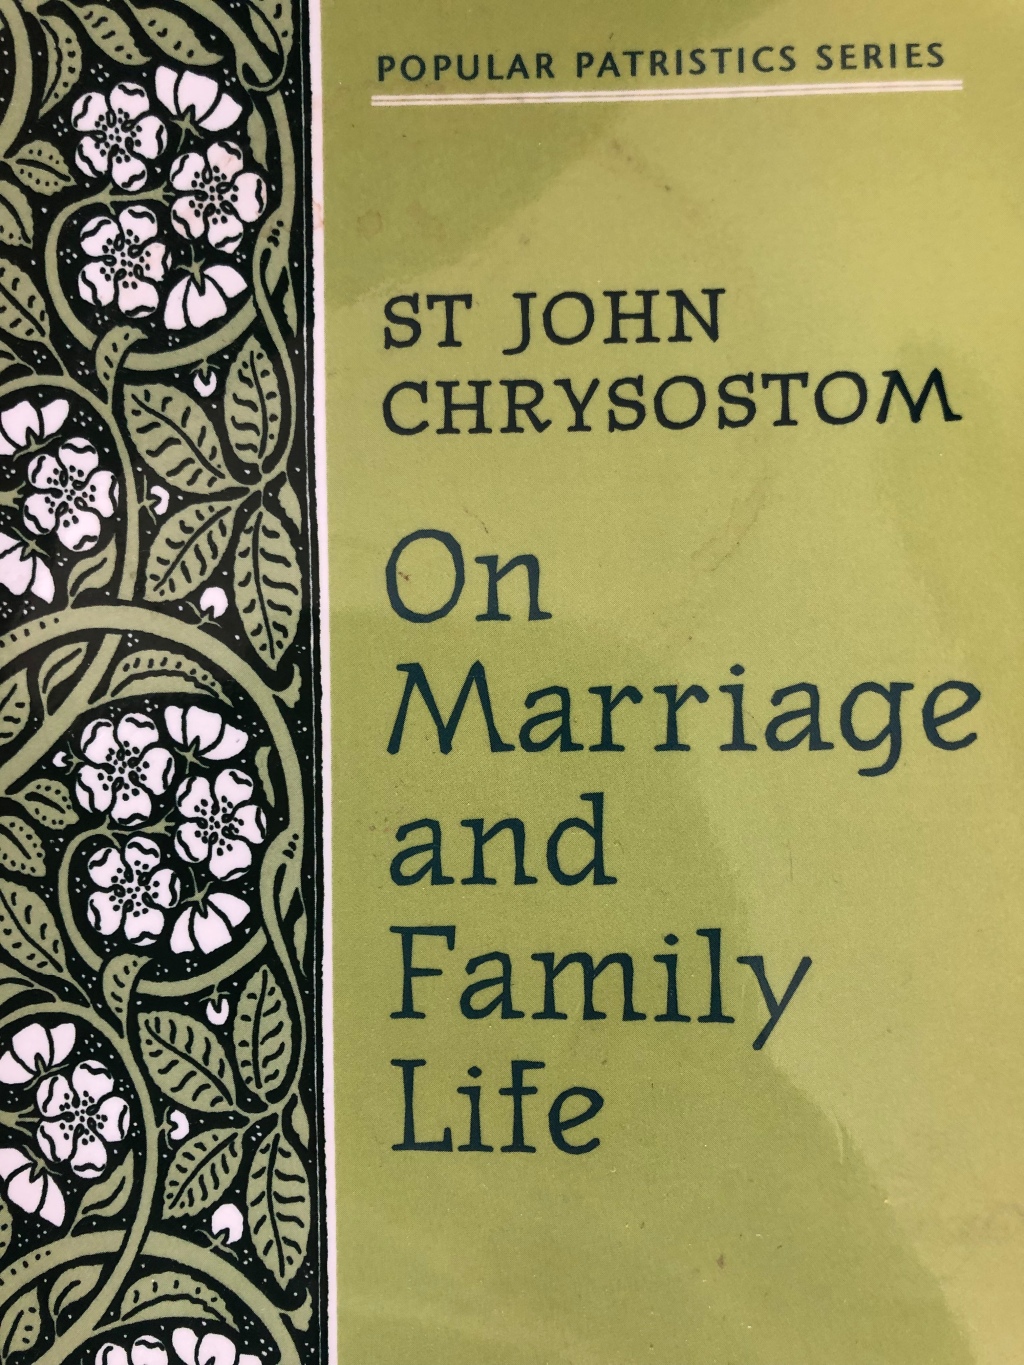 Book Review:  “On Marriage and Family Life”